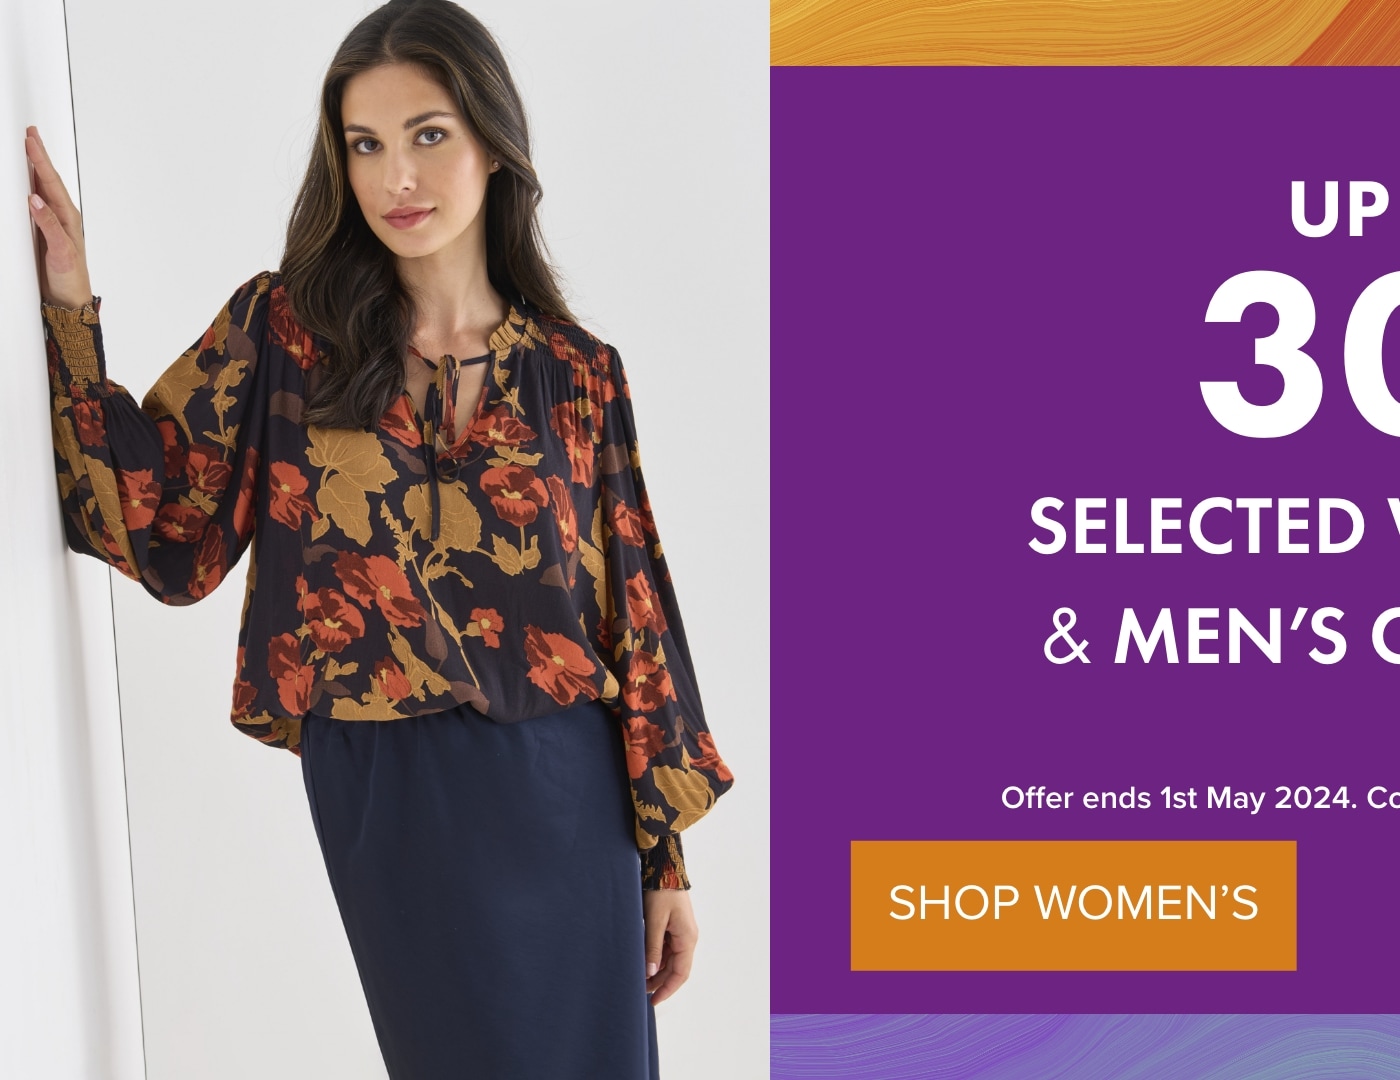 Up to 30% OFF Selected Women's Clothing 